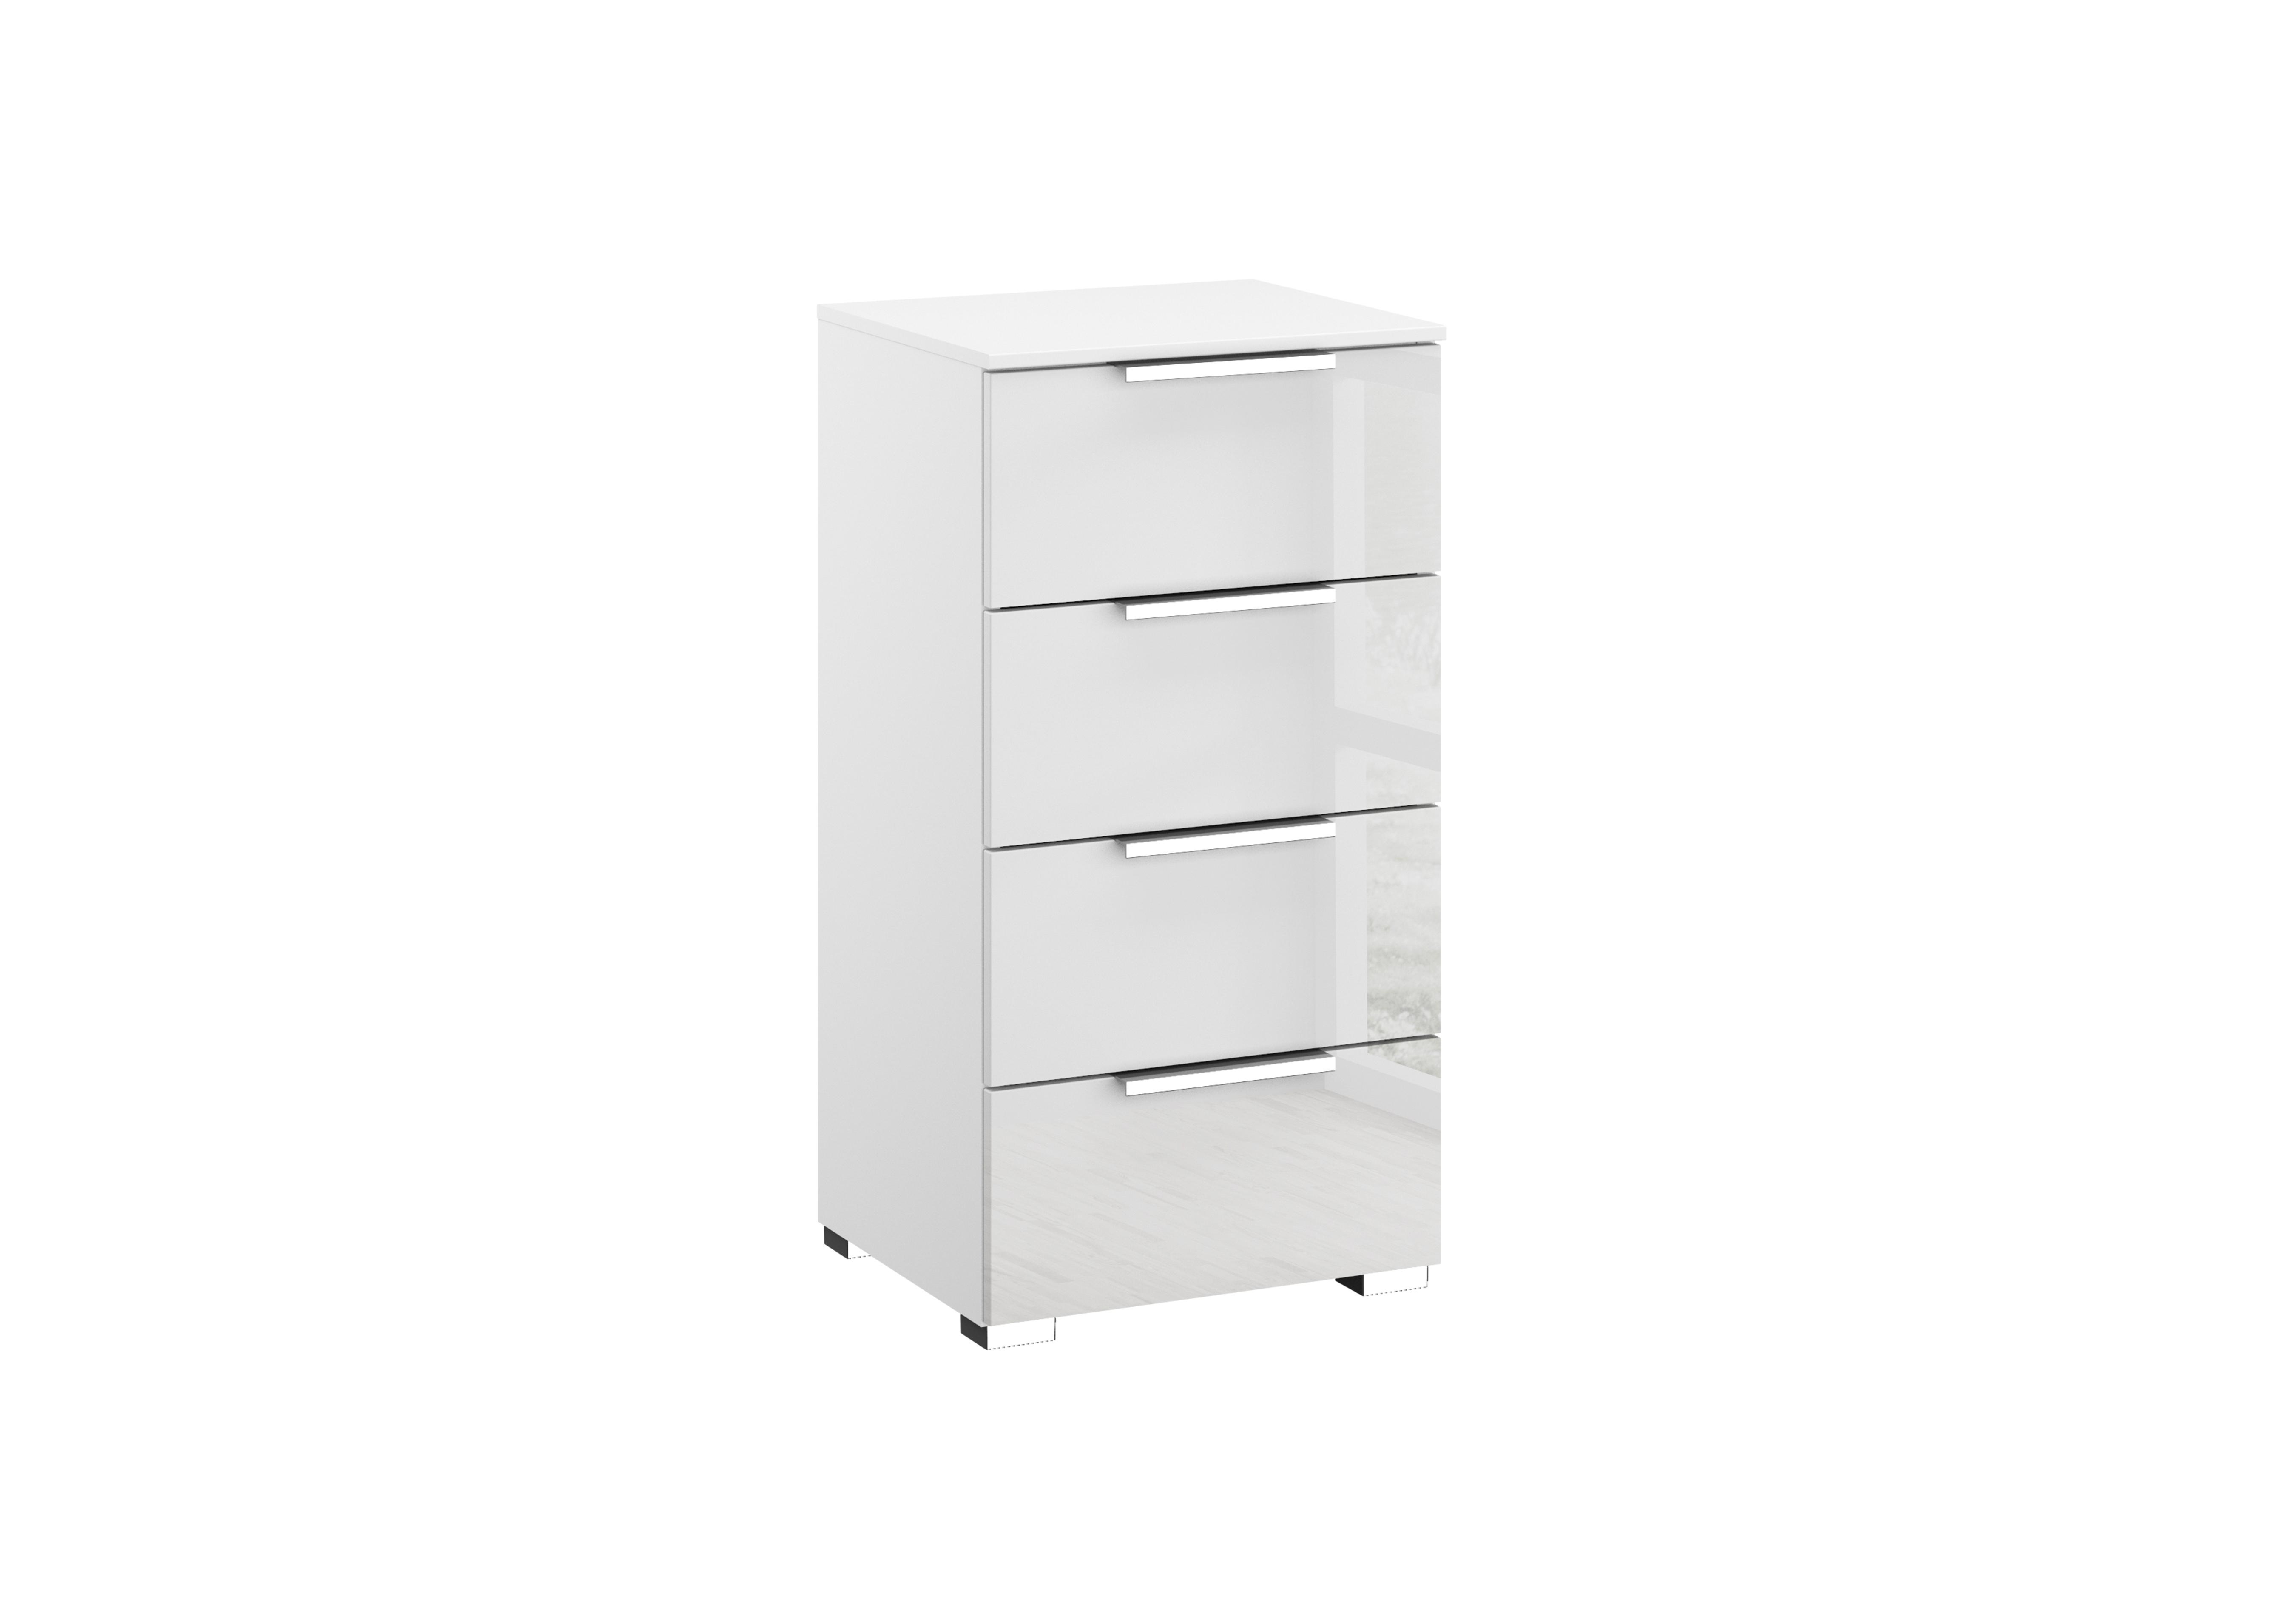 Formes Glass 4 Drawer Narrow Chest in A131b White White Front on Furniture Village